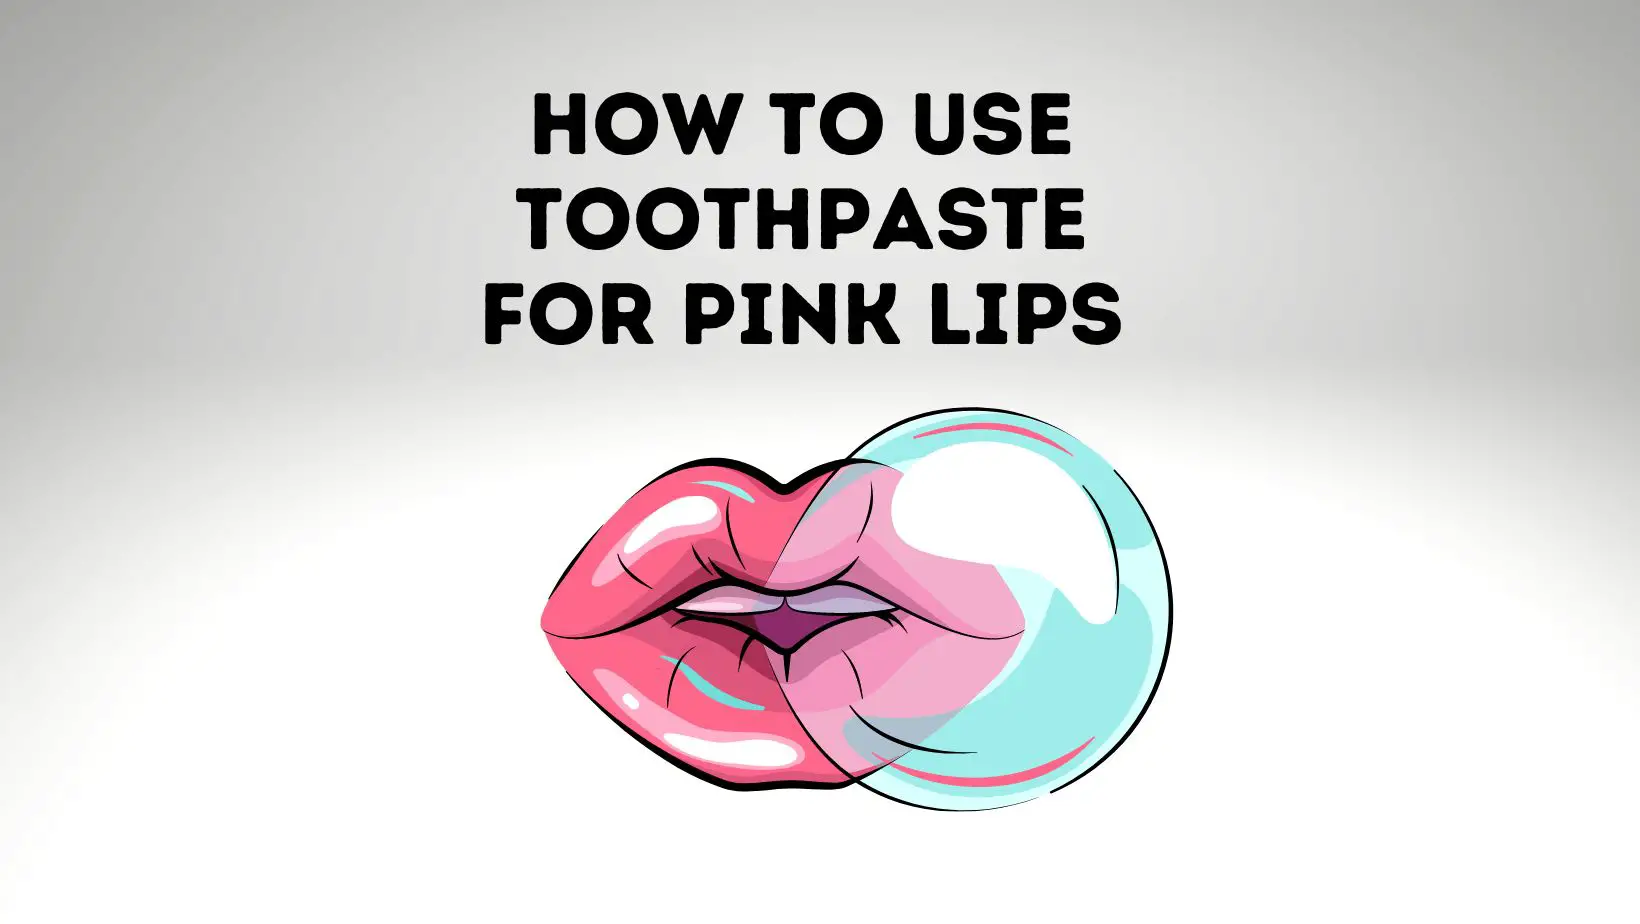 How To Use Toothpaste For Pink Lips